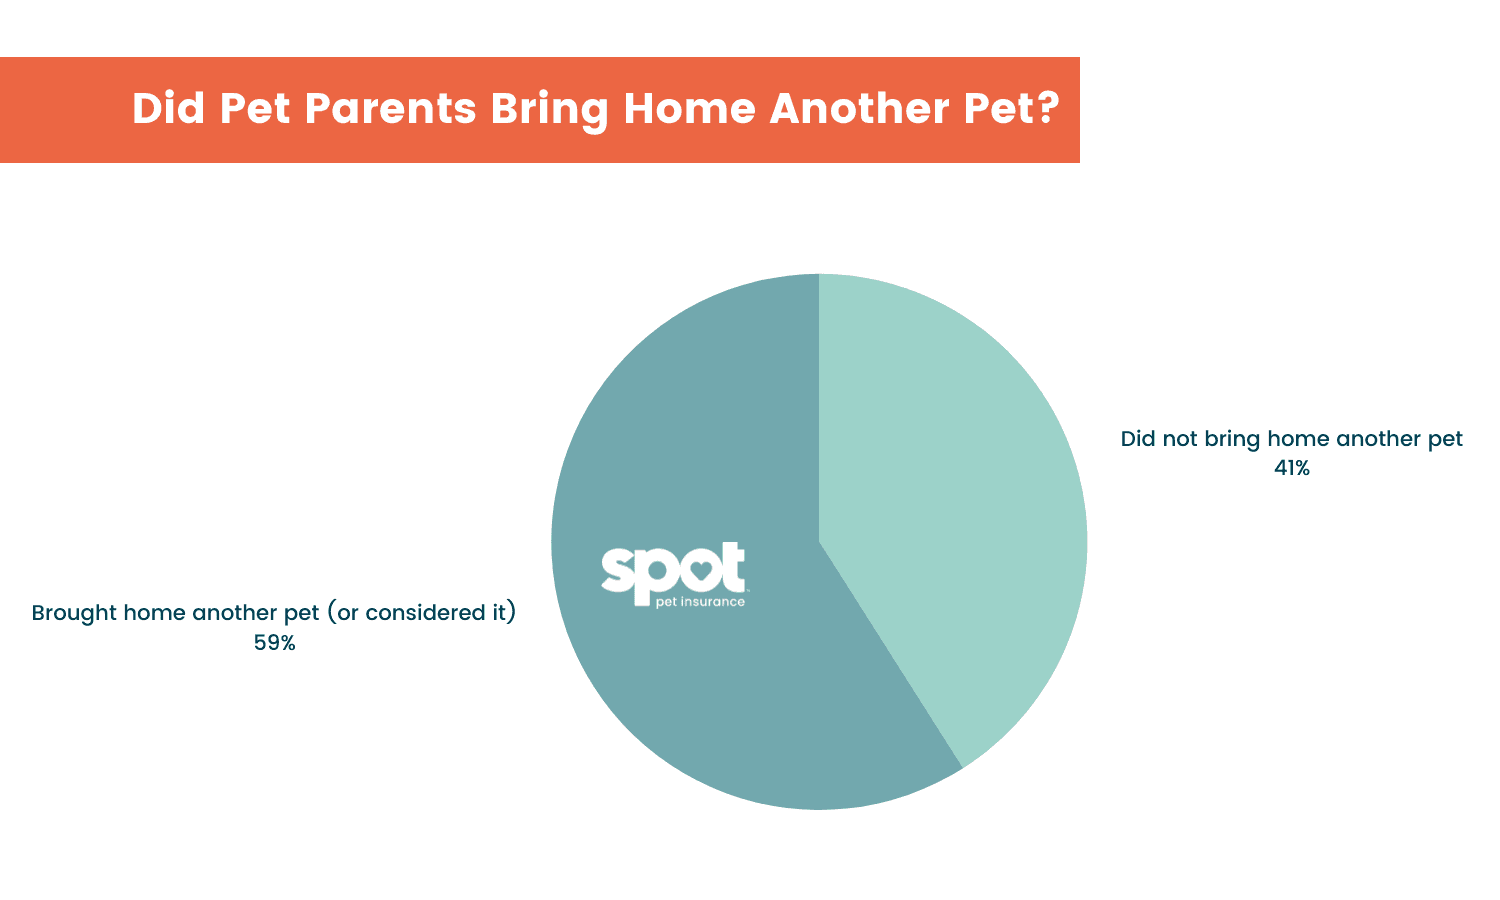 A pie chart shows 59% of pet parents considered or brought home another pet and 41% did not.